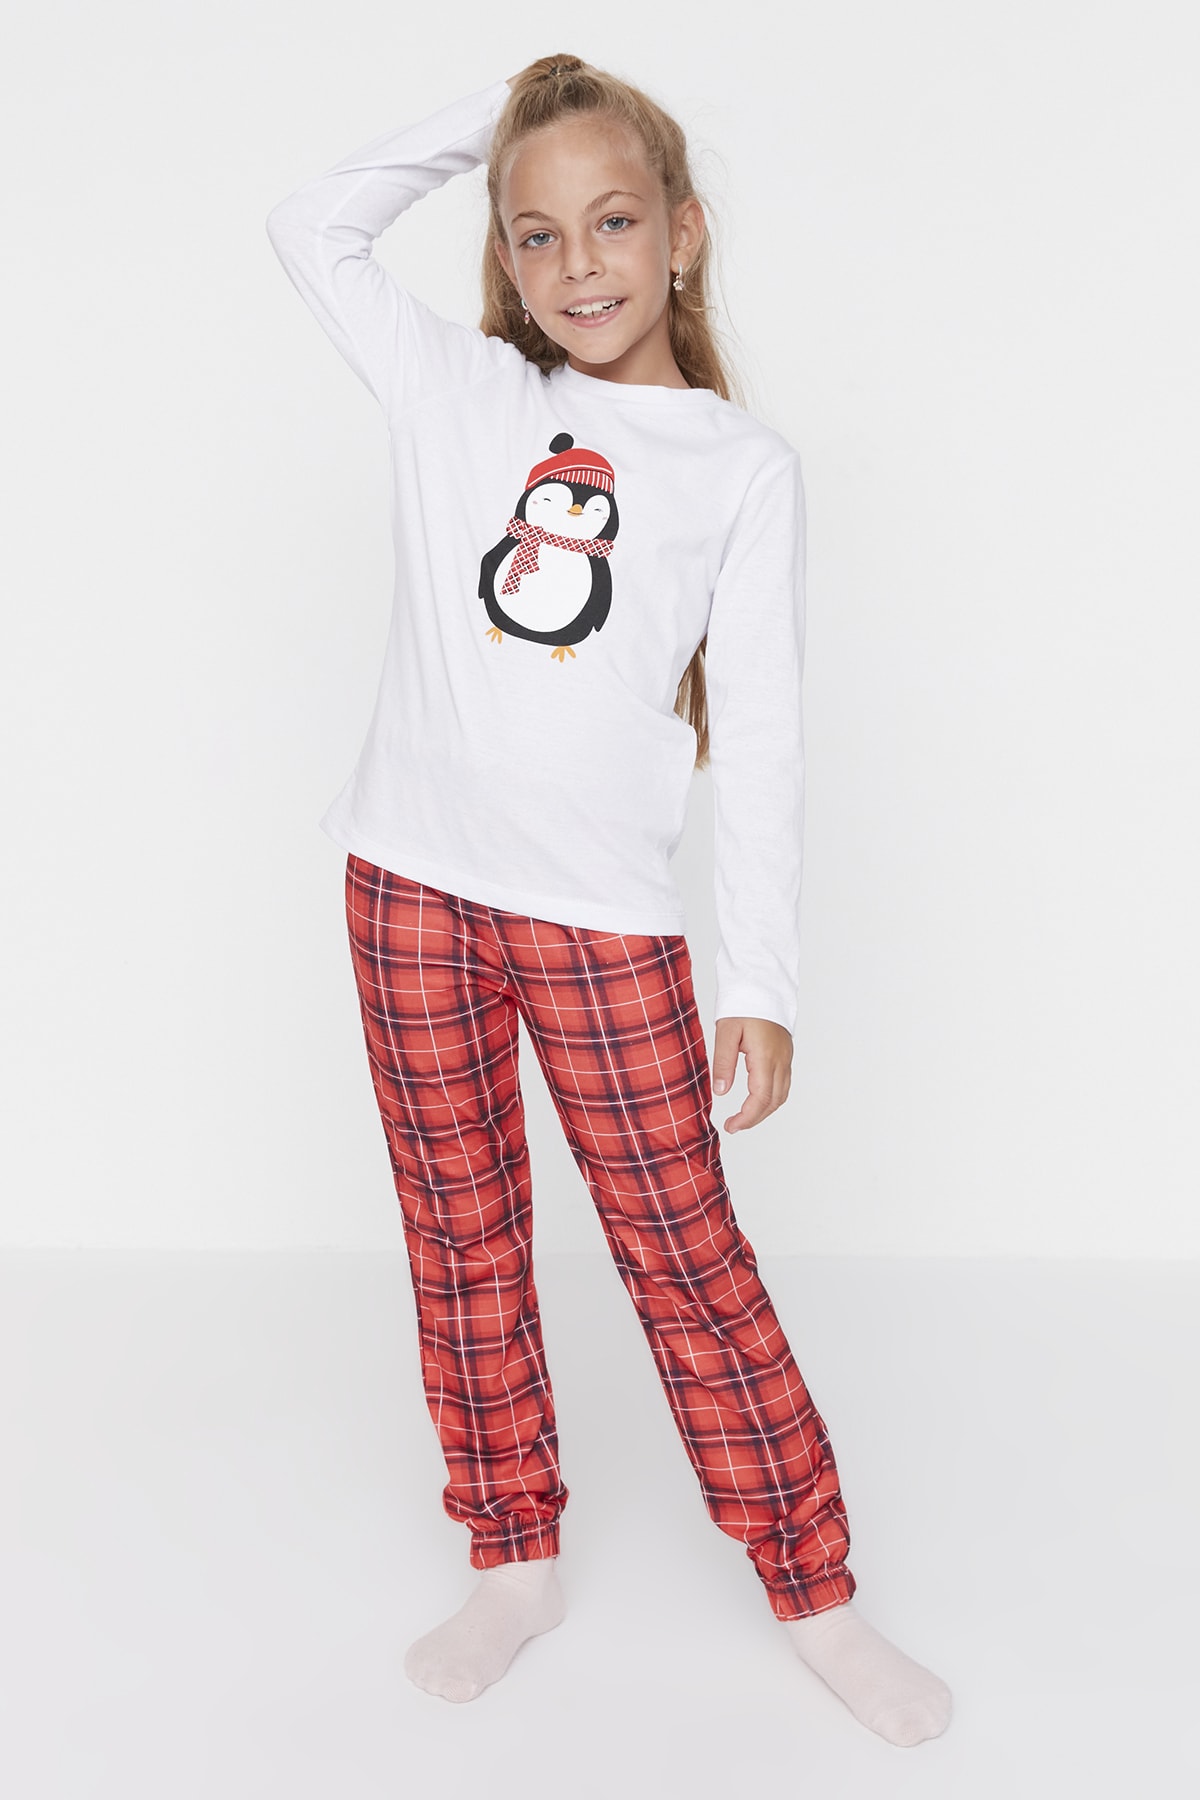 Trendyol Multicolored Girls' Knitted Family Combine Pajamas Set